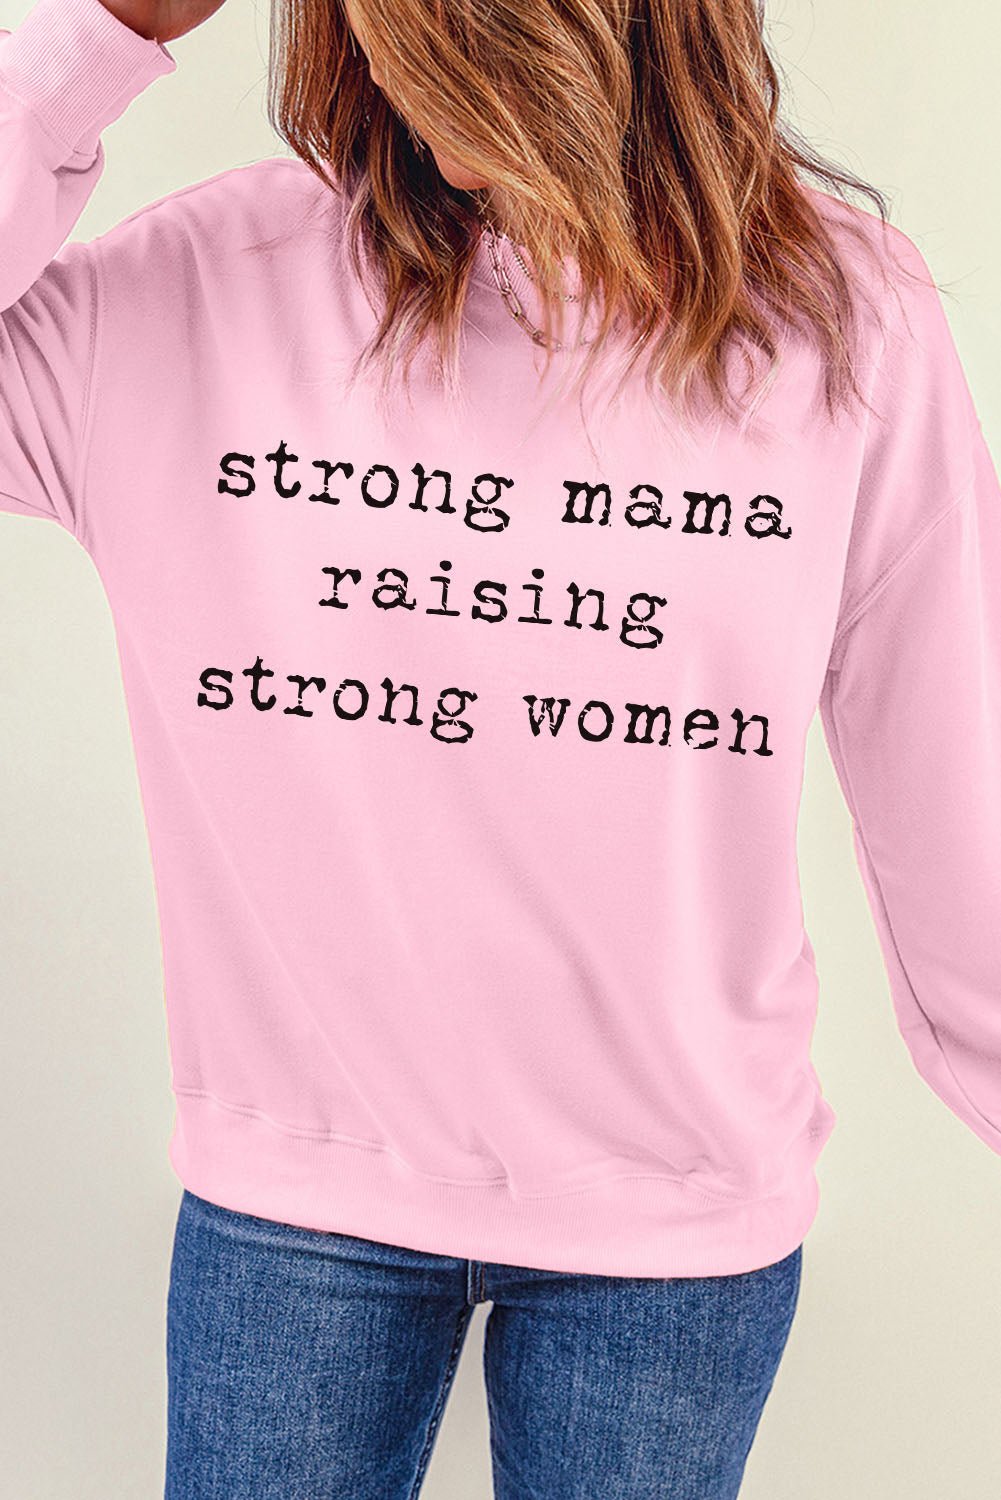 "Strong Mama Raising Strong Women Graphic Sweatshirt - A Tribute to Motherhood and Femininity, Celebrating the Unbreakable Bond with Your Little Girls" - Guy Christopher